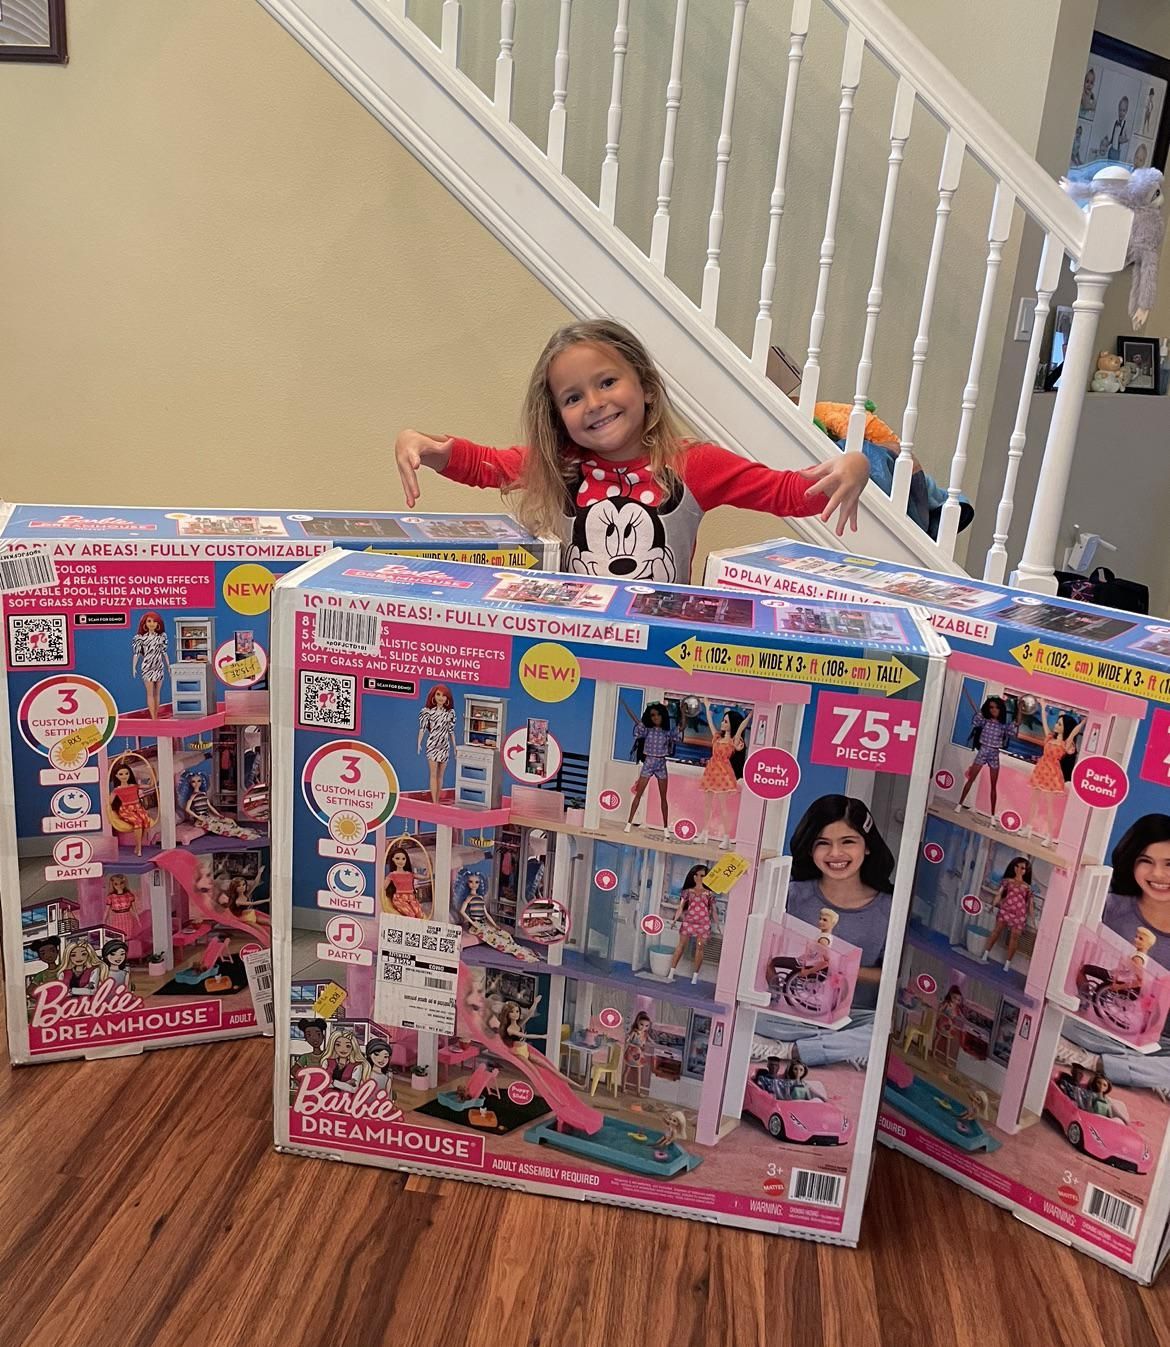 My daughter had my wife’s phone on a long car ride. She ordered all the Barbie dream houses from Amazon.